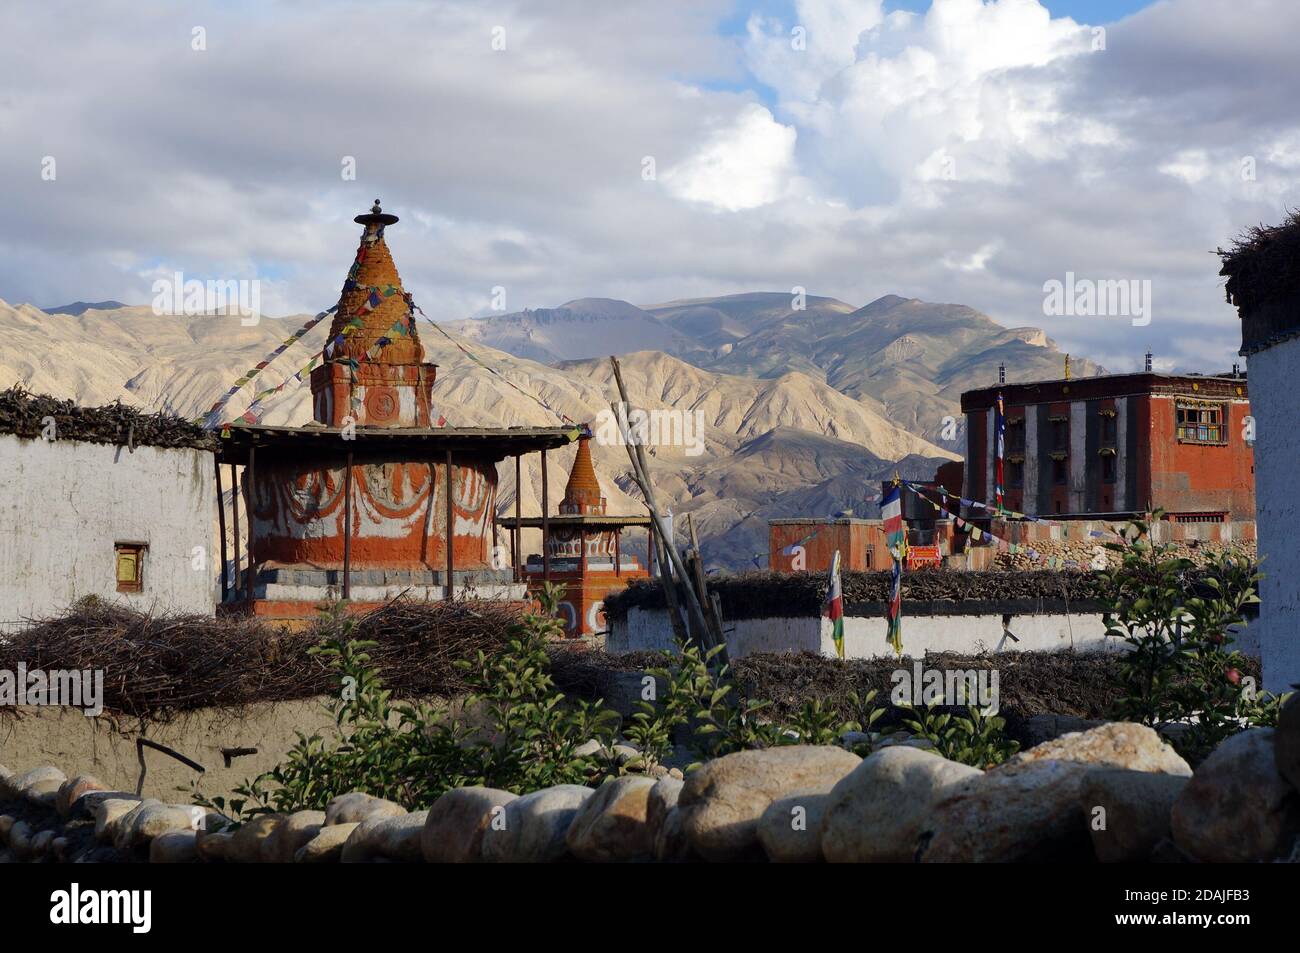 View of the colorful chorten and the Buddhist monastery in the Tsarang village. Trekking to the closed zone of Upper Mustang. Nepal. Stock Photo